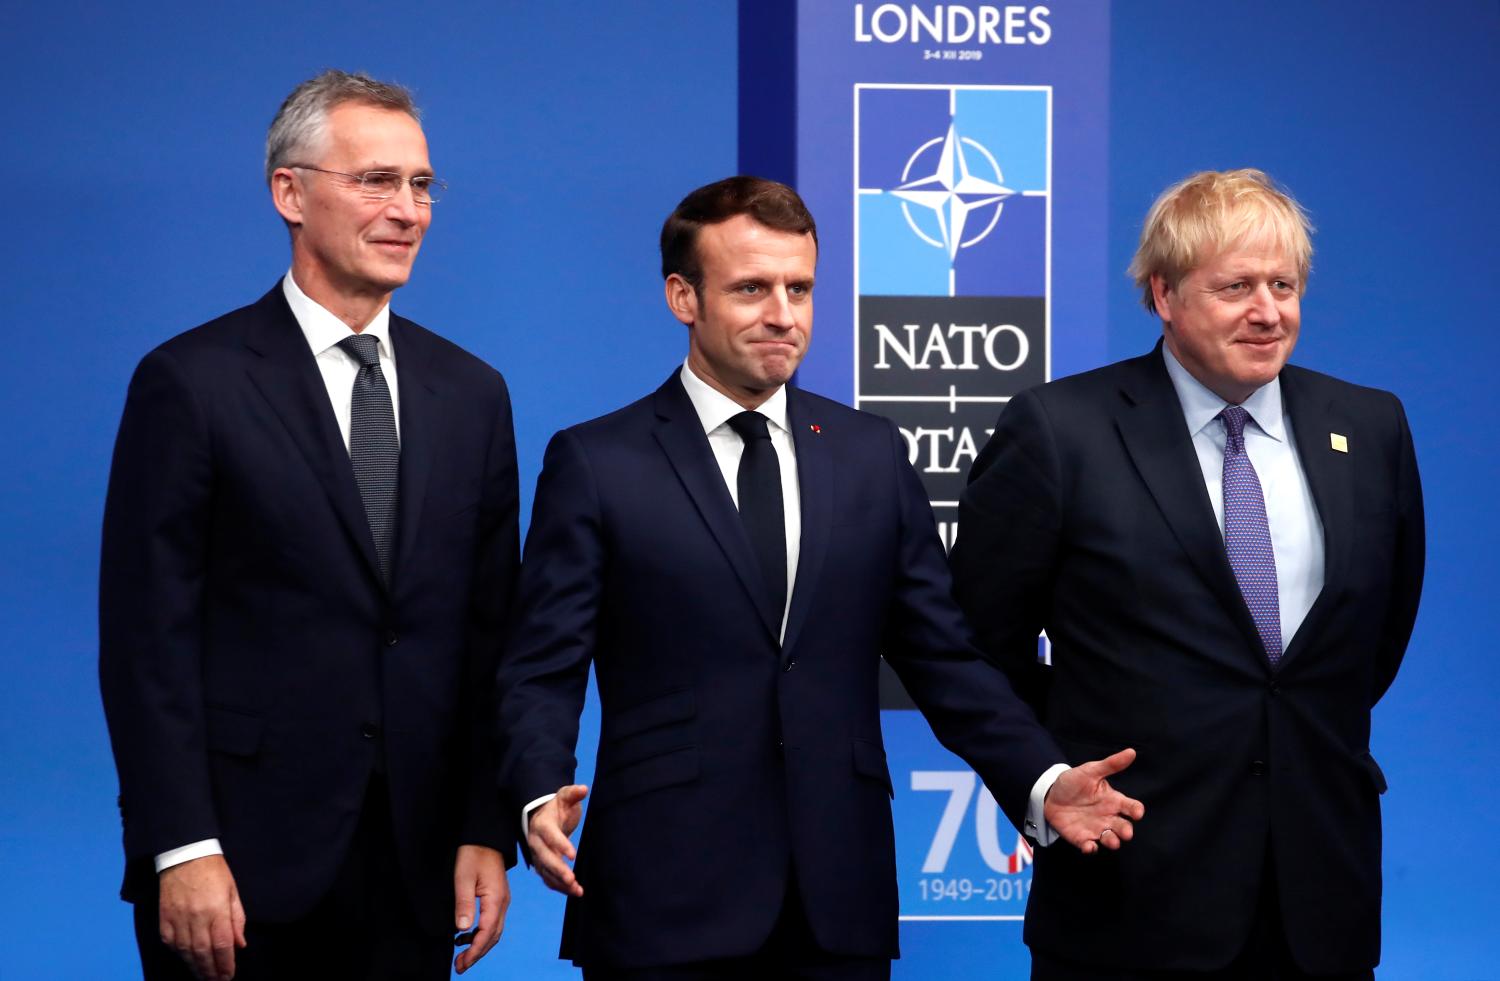 NATO Secretary General Jens Stoltenberg and Britain's Prime Minister Boris Johnson welcome France's President Emmanuel Macron at the NATO leaders summit in Watford, Britain December 4, 2019. REUTERS/Christian Hartmann/Pool